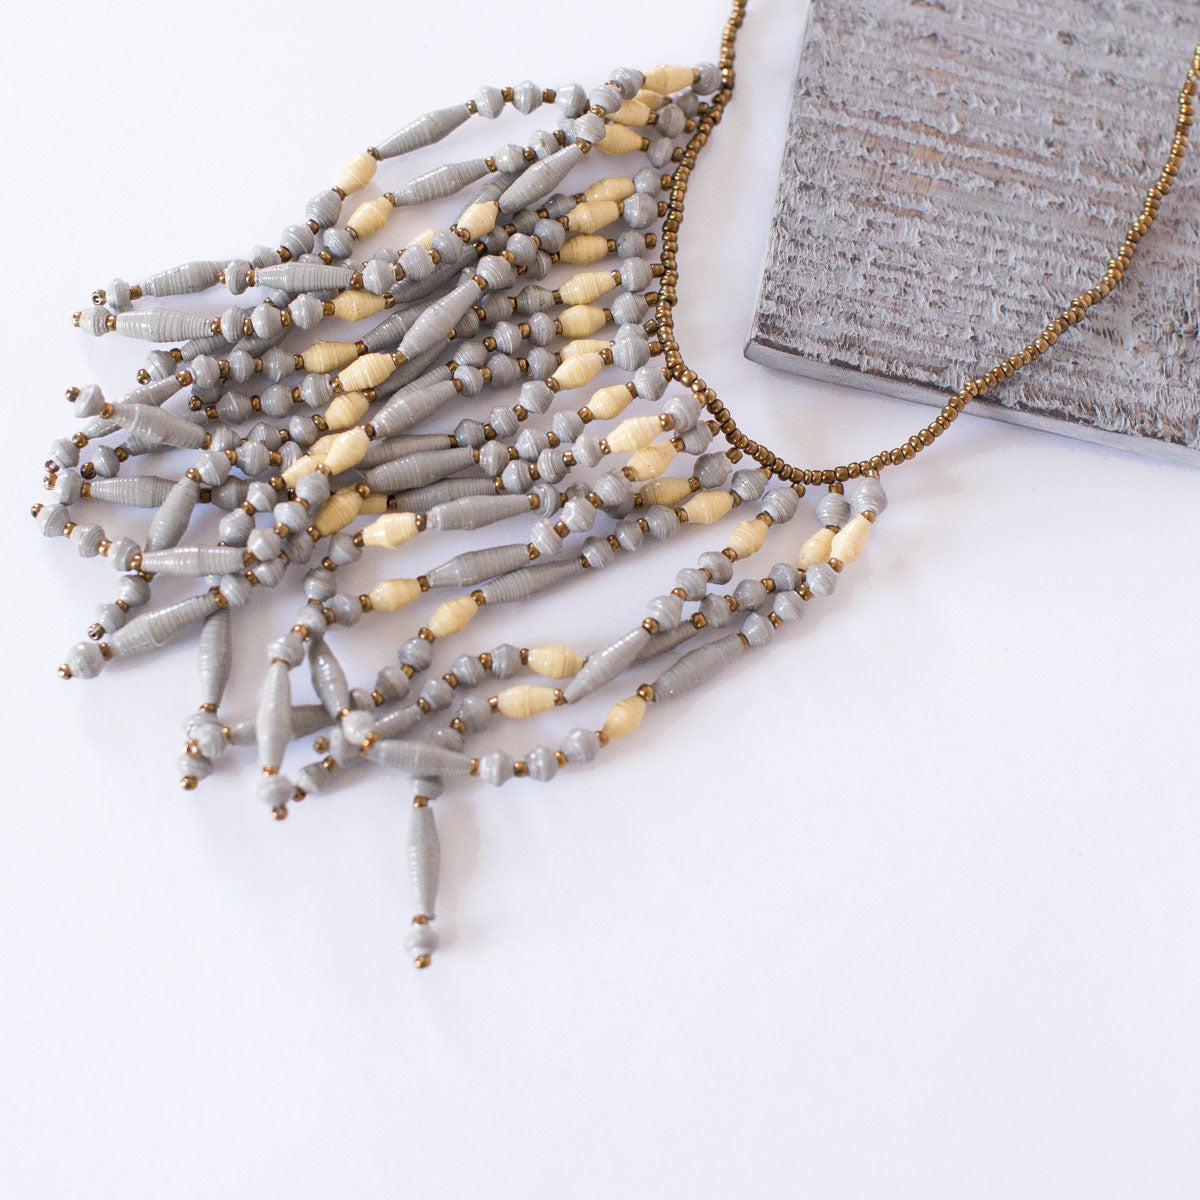 JustOne's necklace with several dangling strings of paper beads in grey and tan colours, handcrafted in Uganda